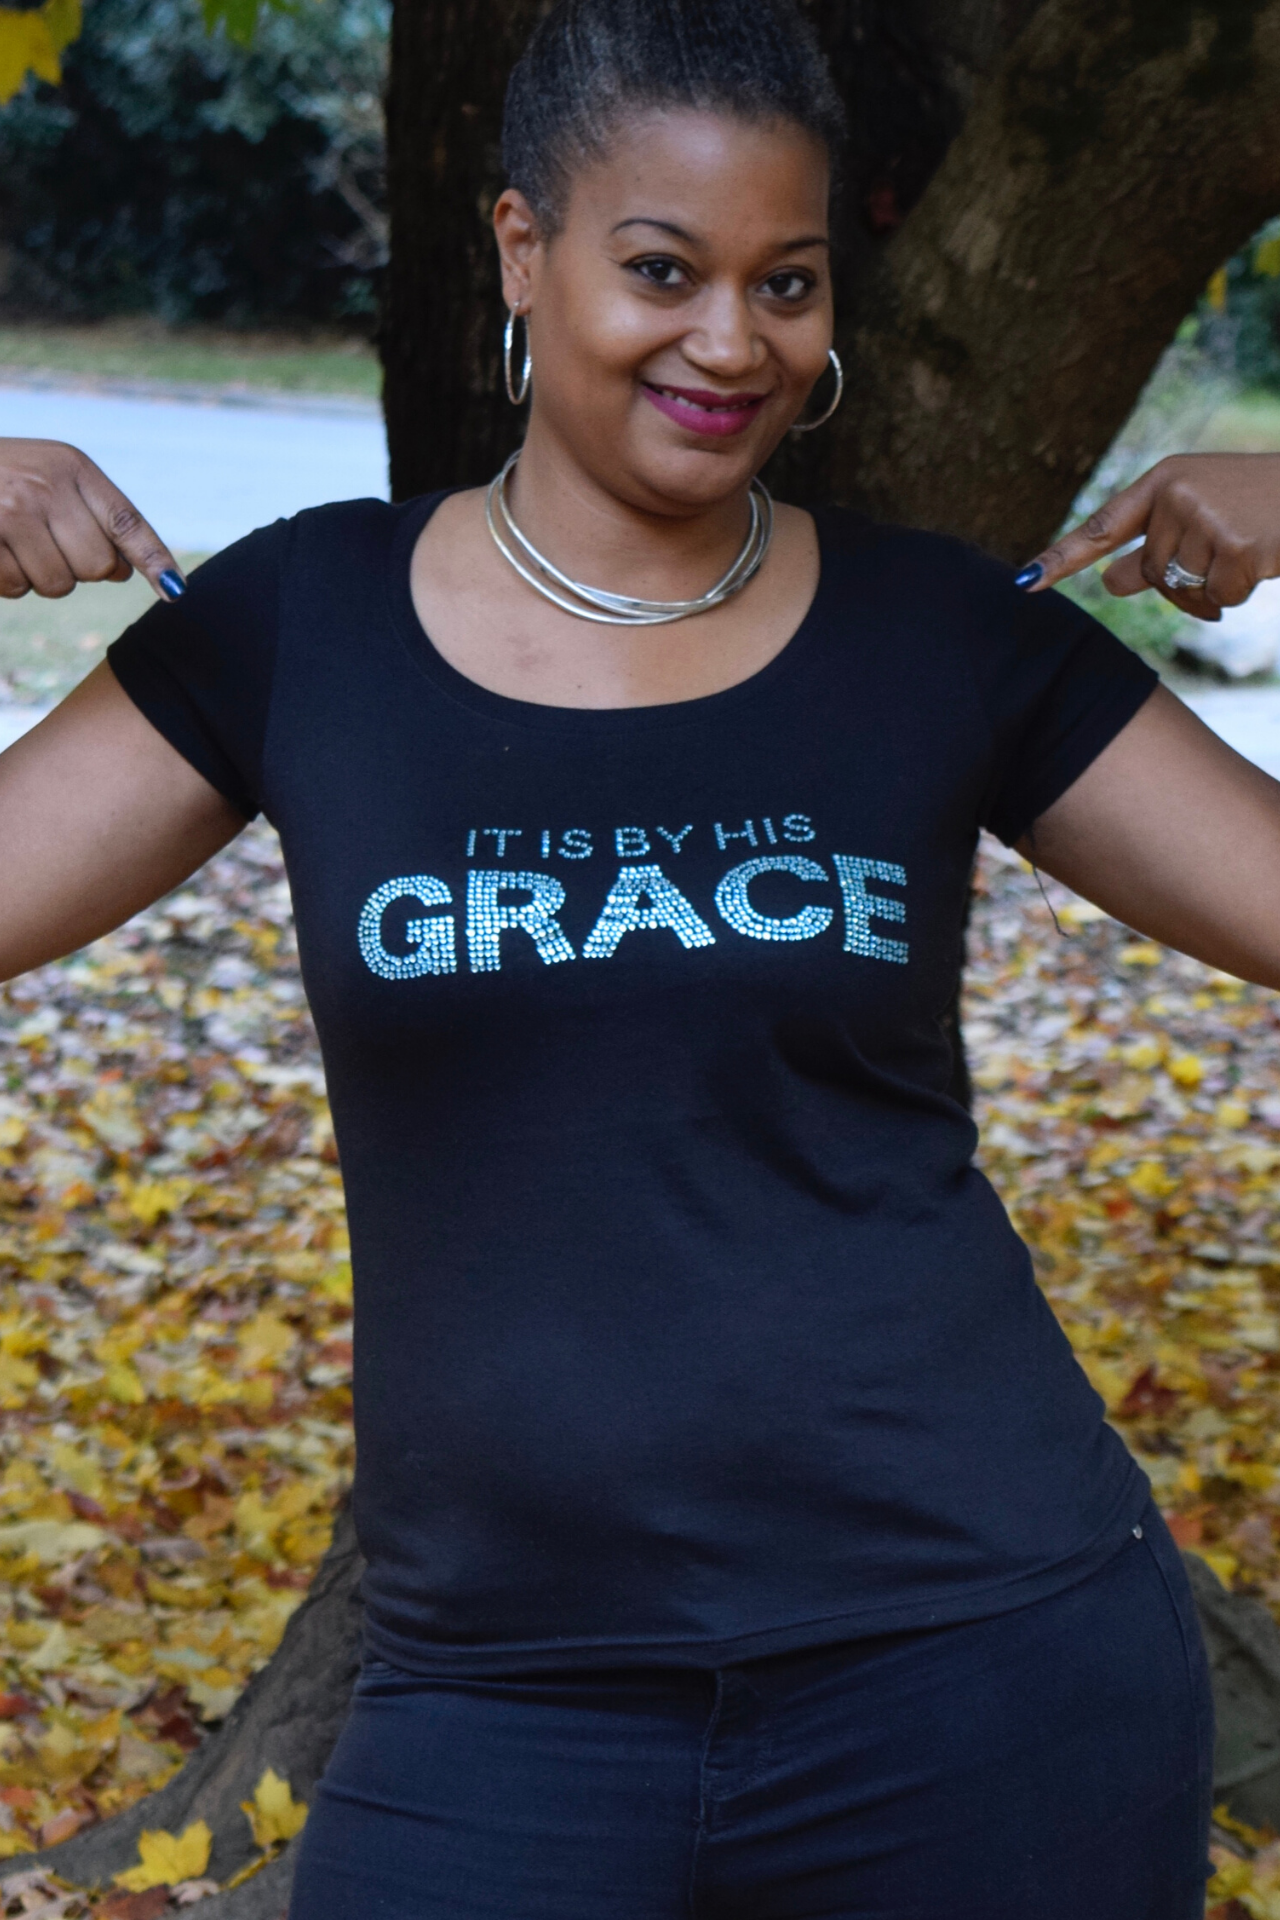 "It Is By His Grace" Fundraising Tee